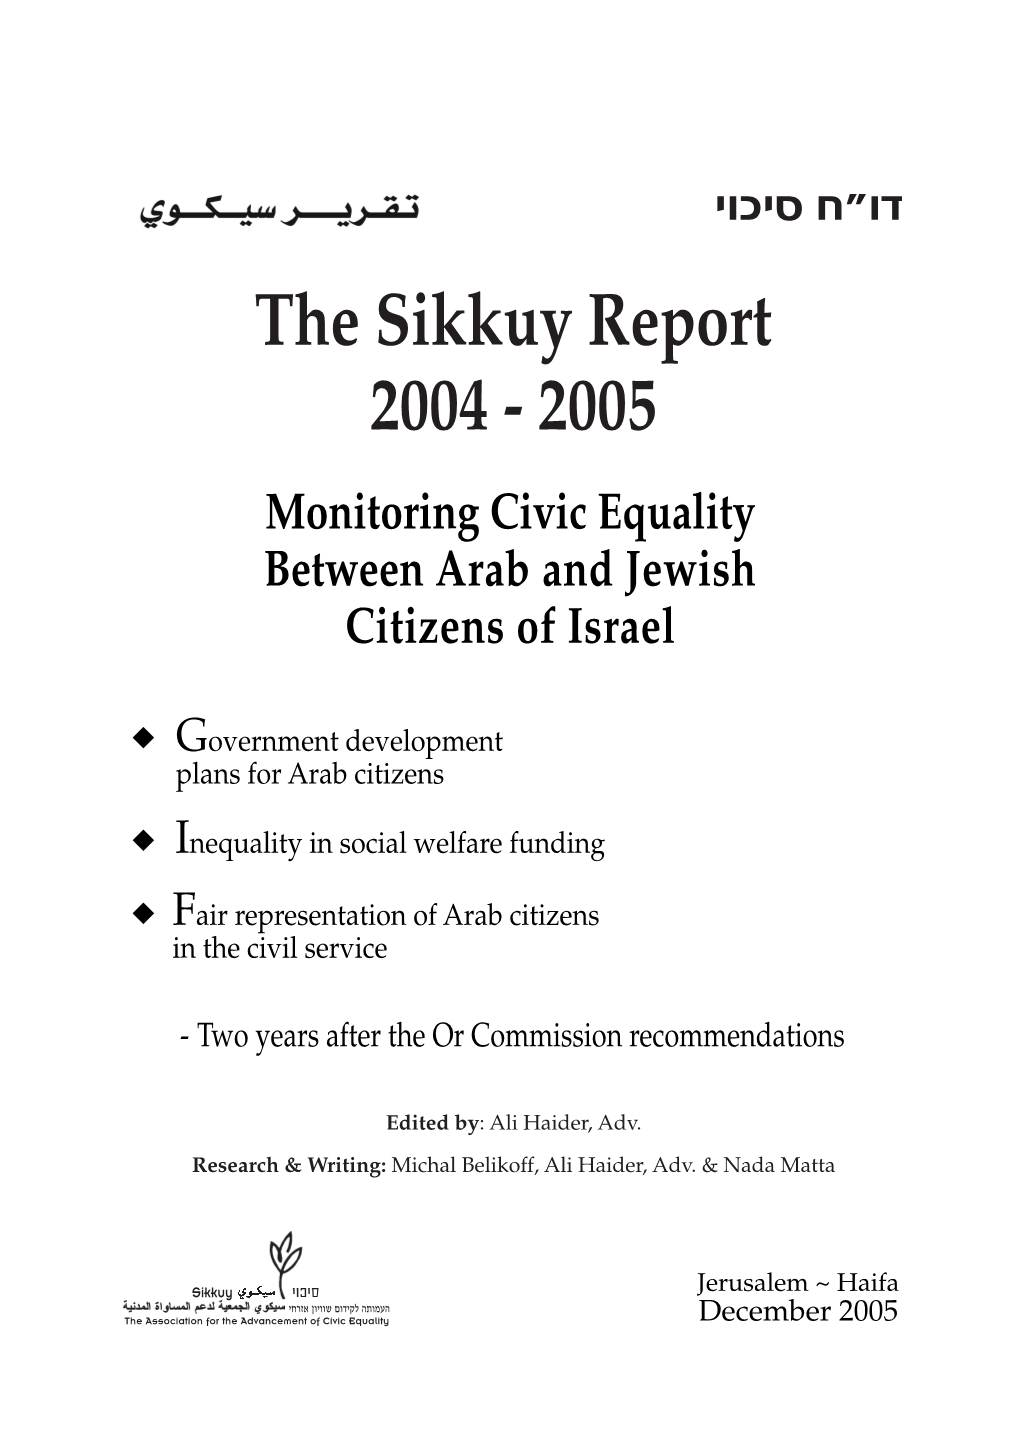 The Sikkuy Report 2004 - 2005 Monitoring Civic Equality Between Arab and Jewish Citizens of Israel